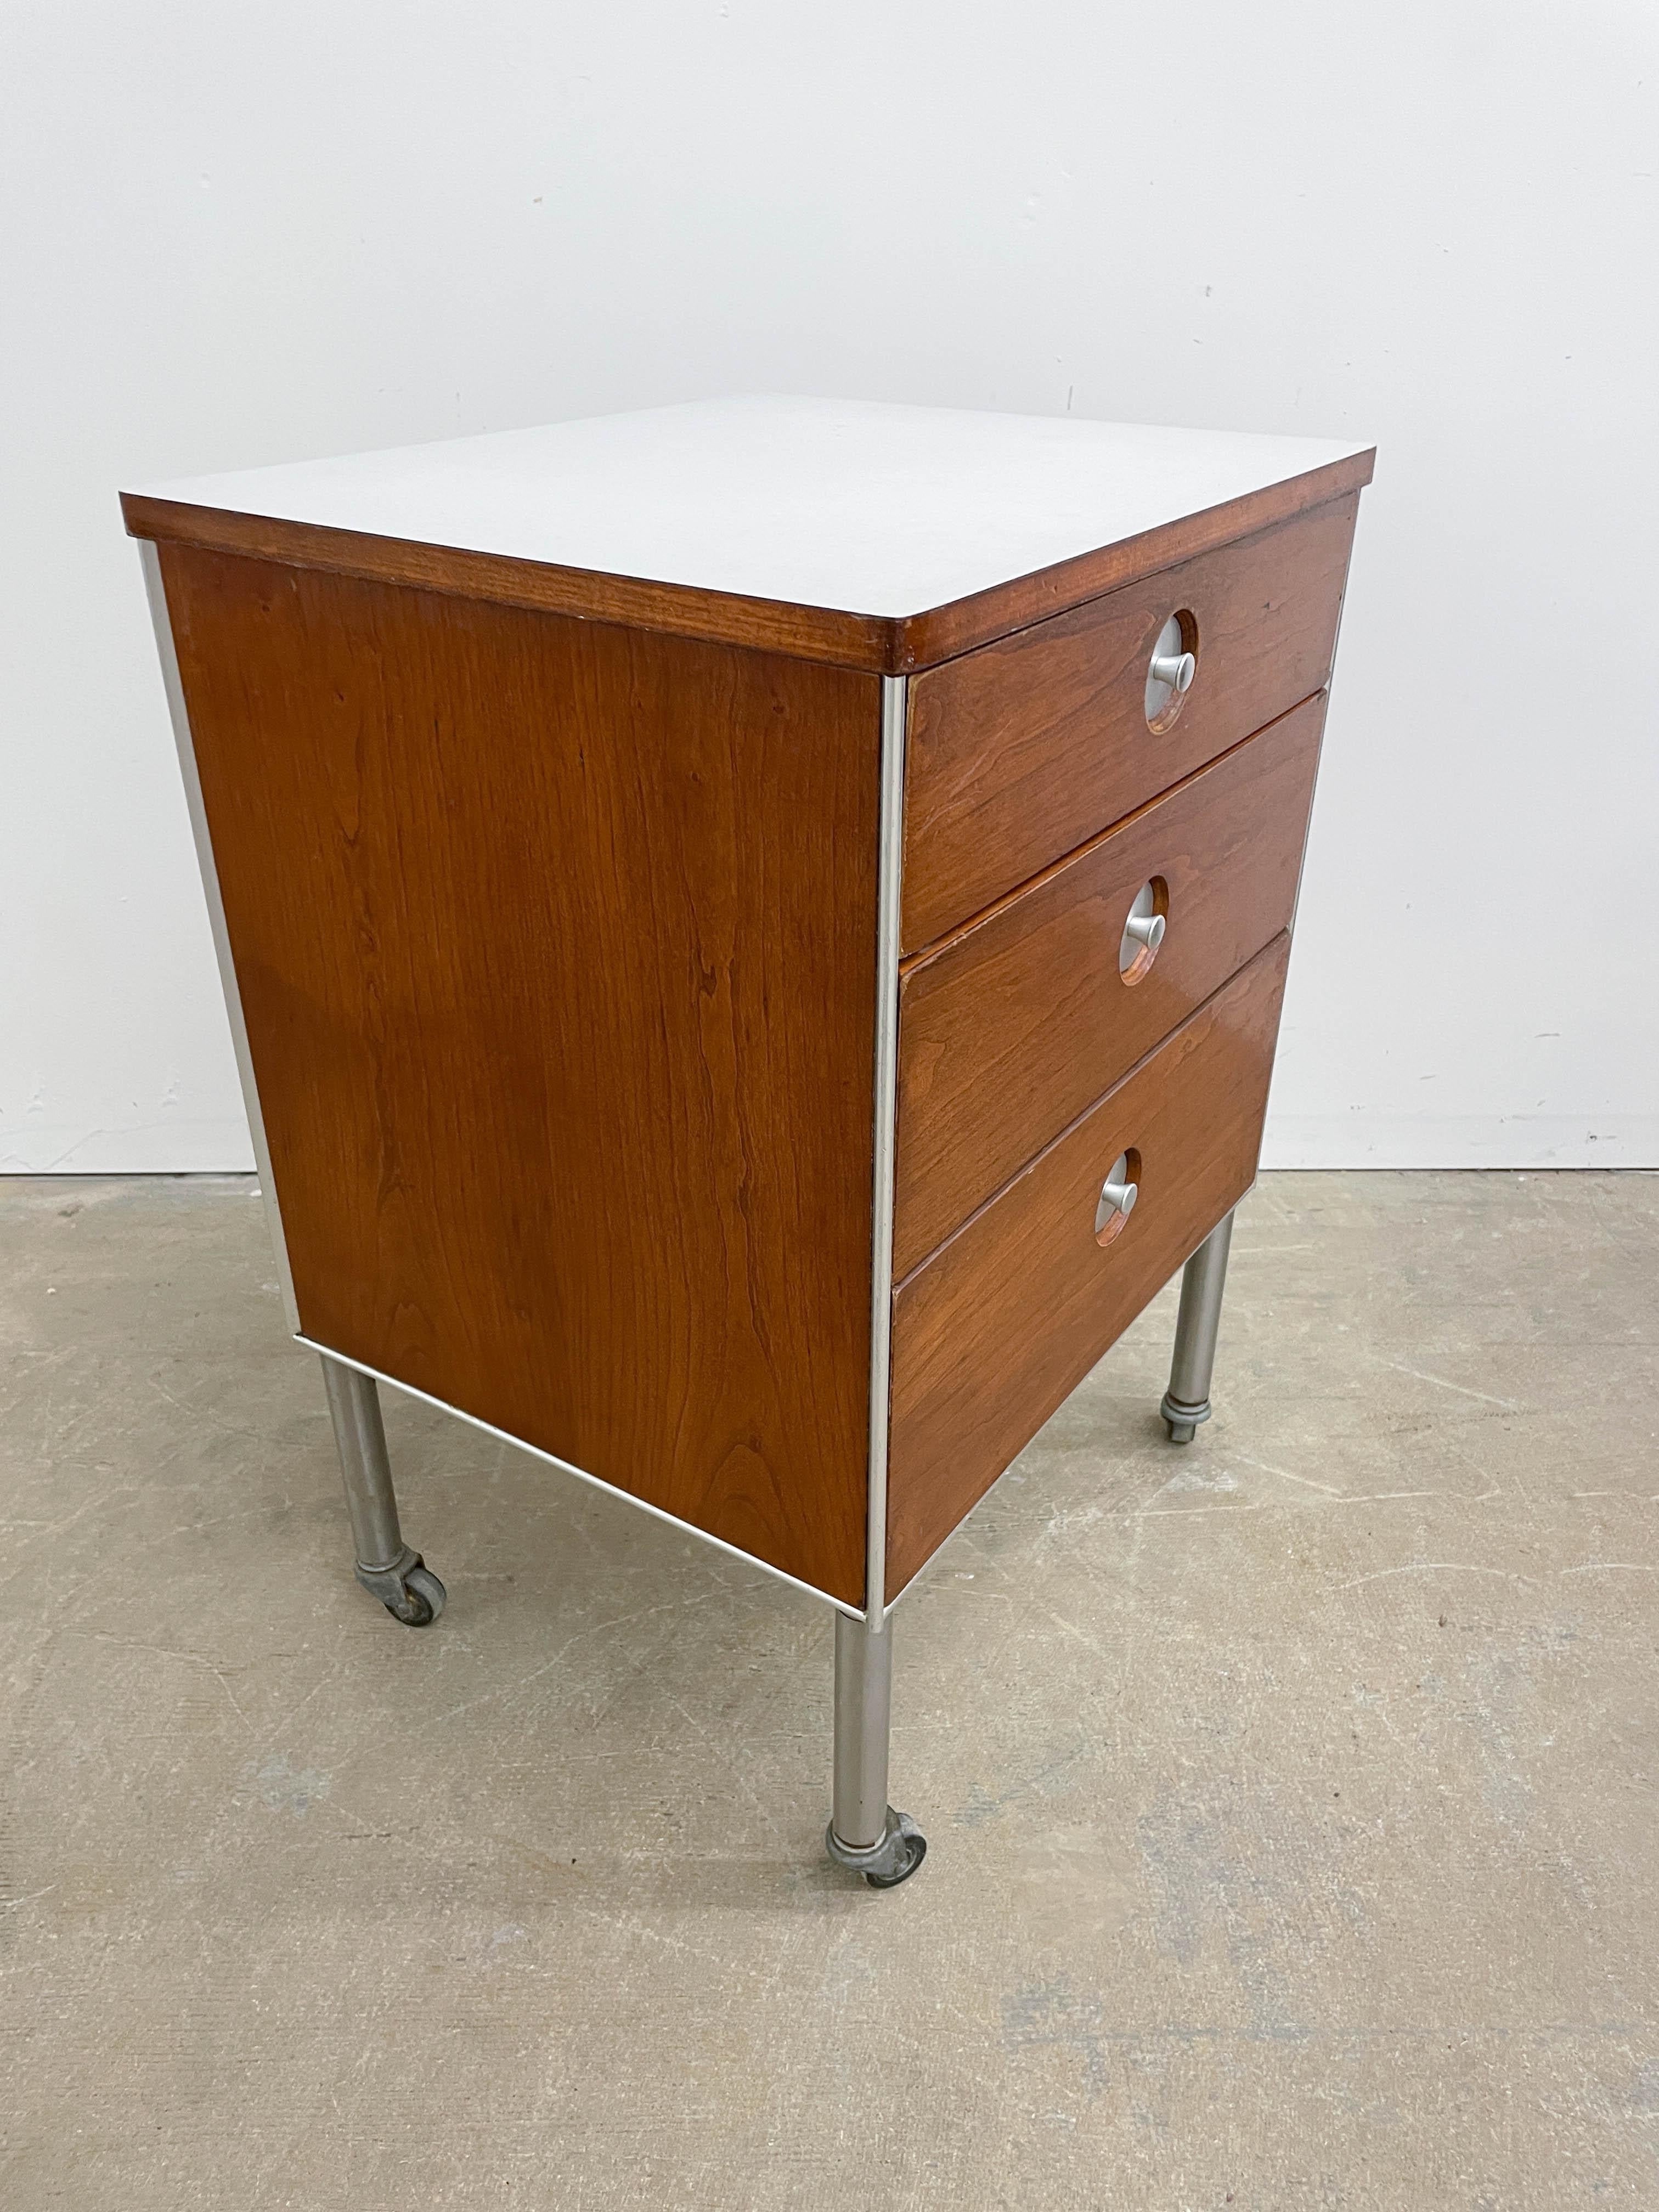 Smartly designed three drawer cabinet bu Raymond Loewy for Hill Rom. Highly functional on swiveling casters, plenty of storage and a high quality formica top. Distinctive formed aluminum pulls, walnut fronted drawers and metal hanging rack on rear.
